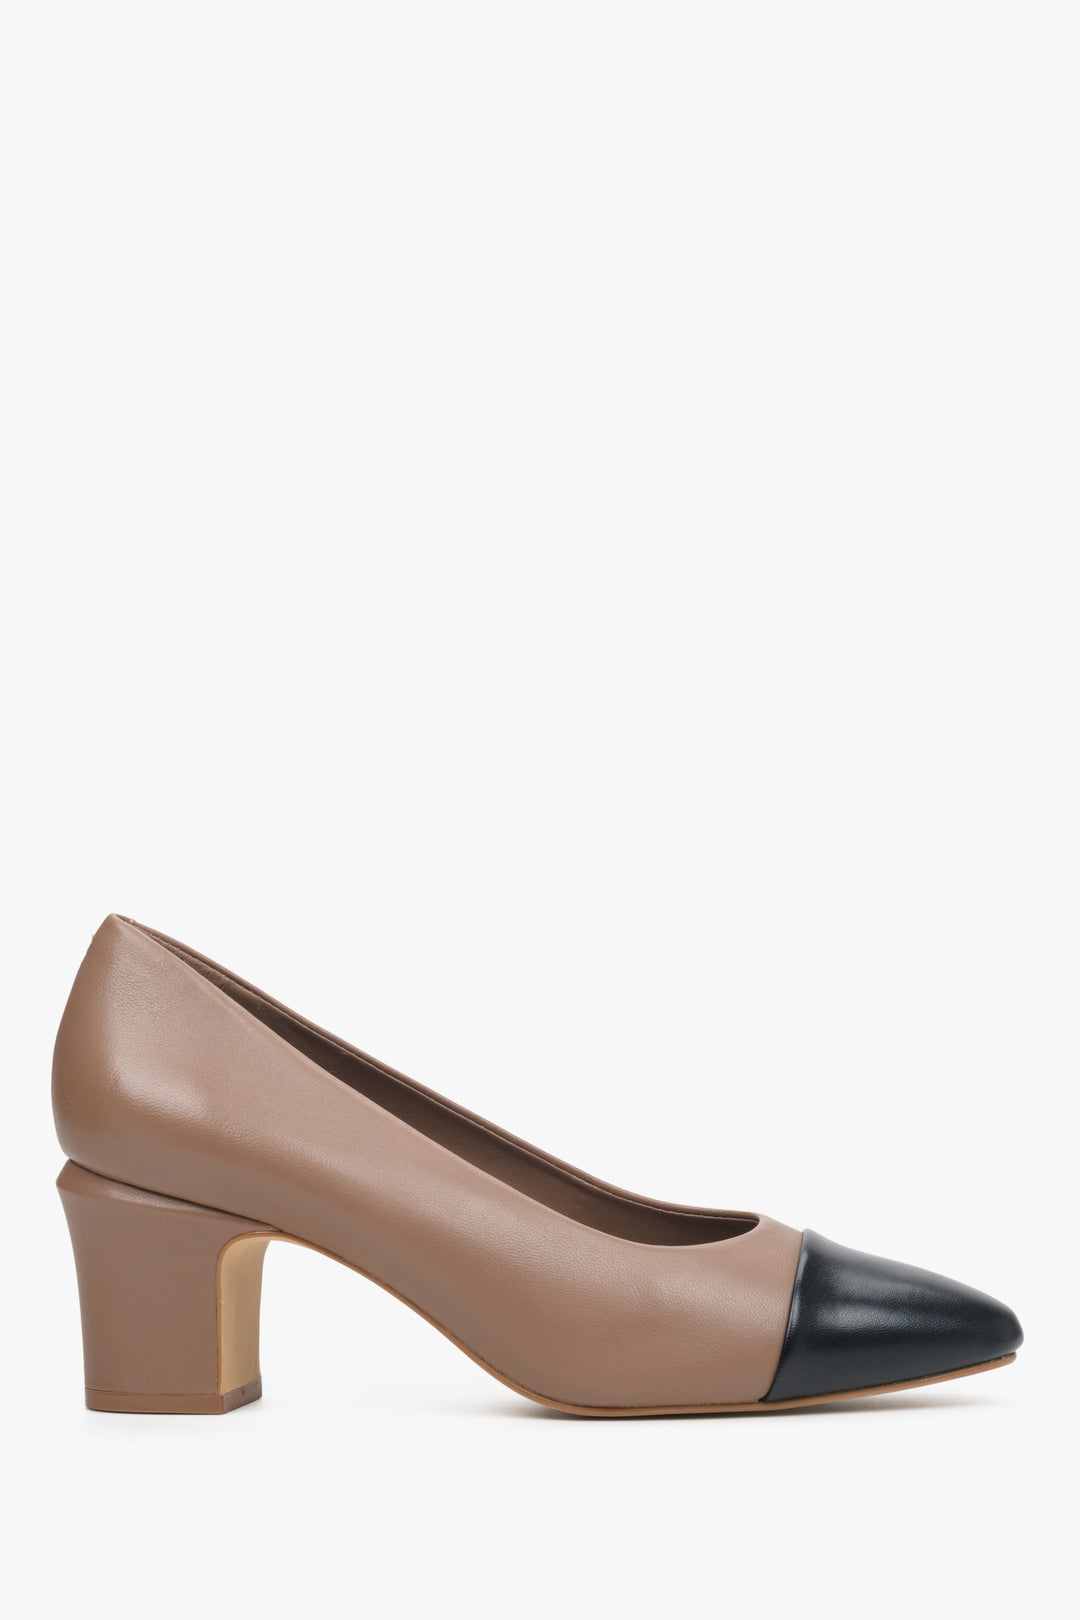 Women's Brown Leather Pumps with Square Heel Estro ER00113739.